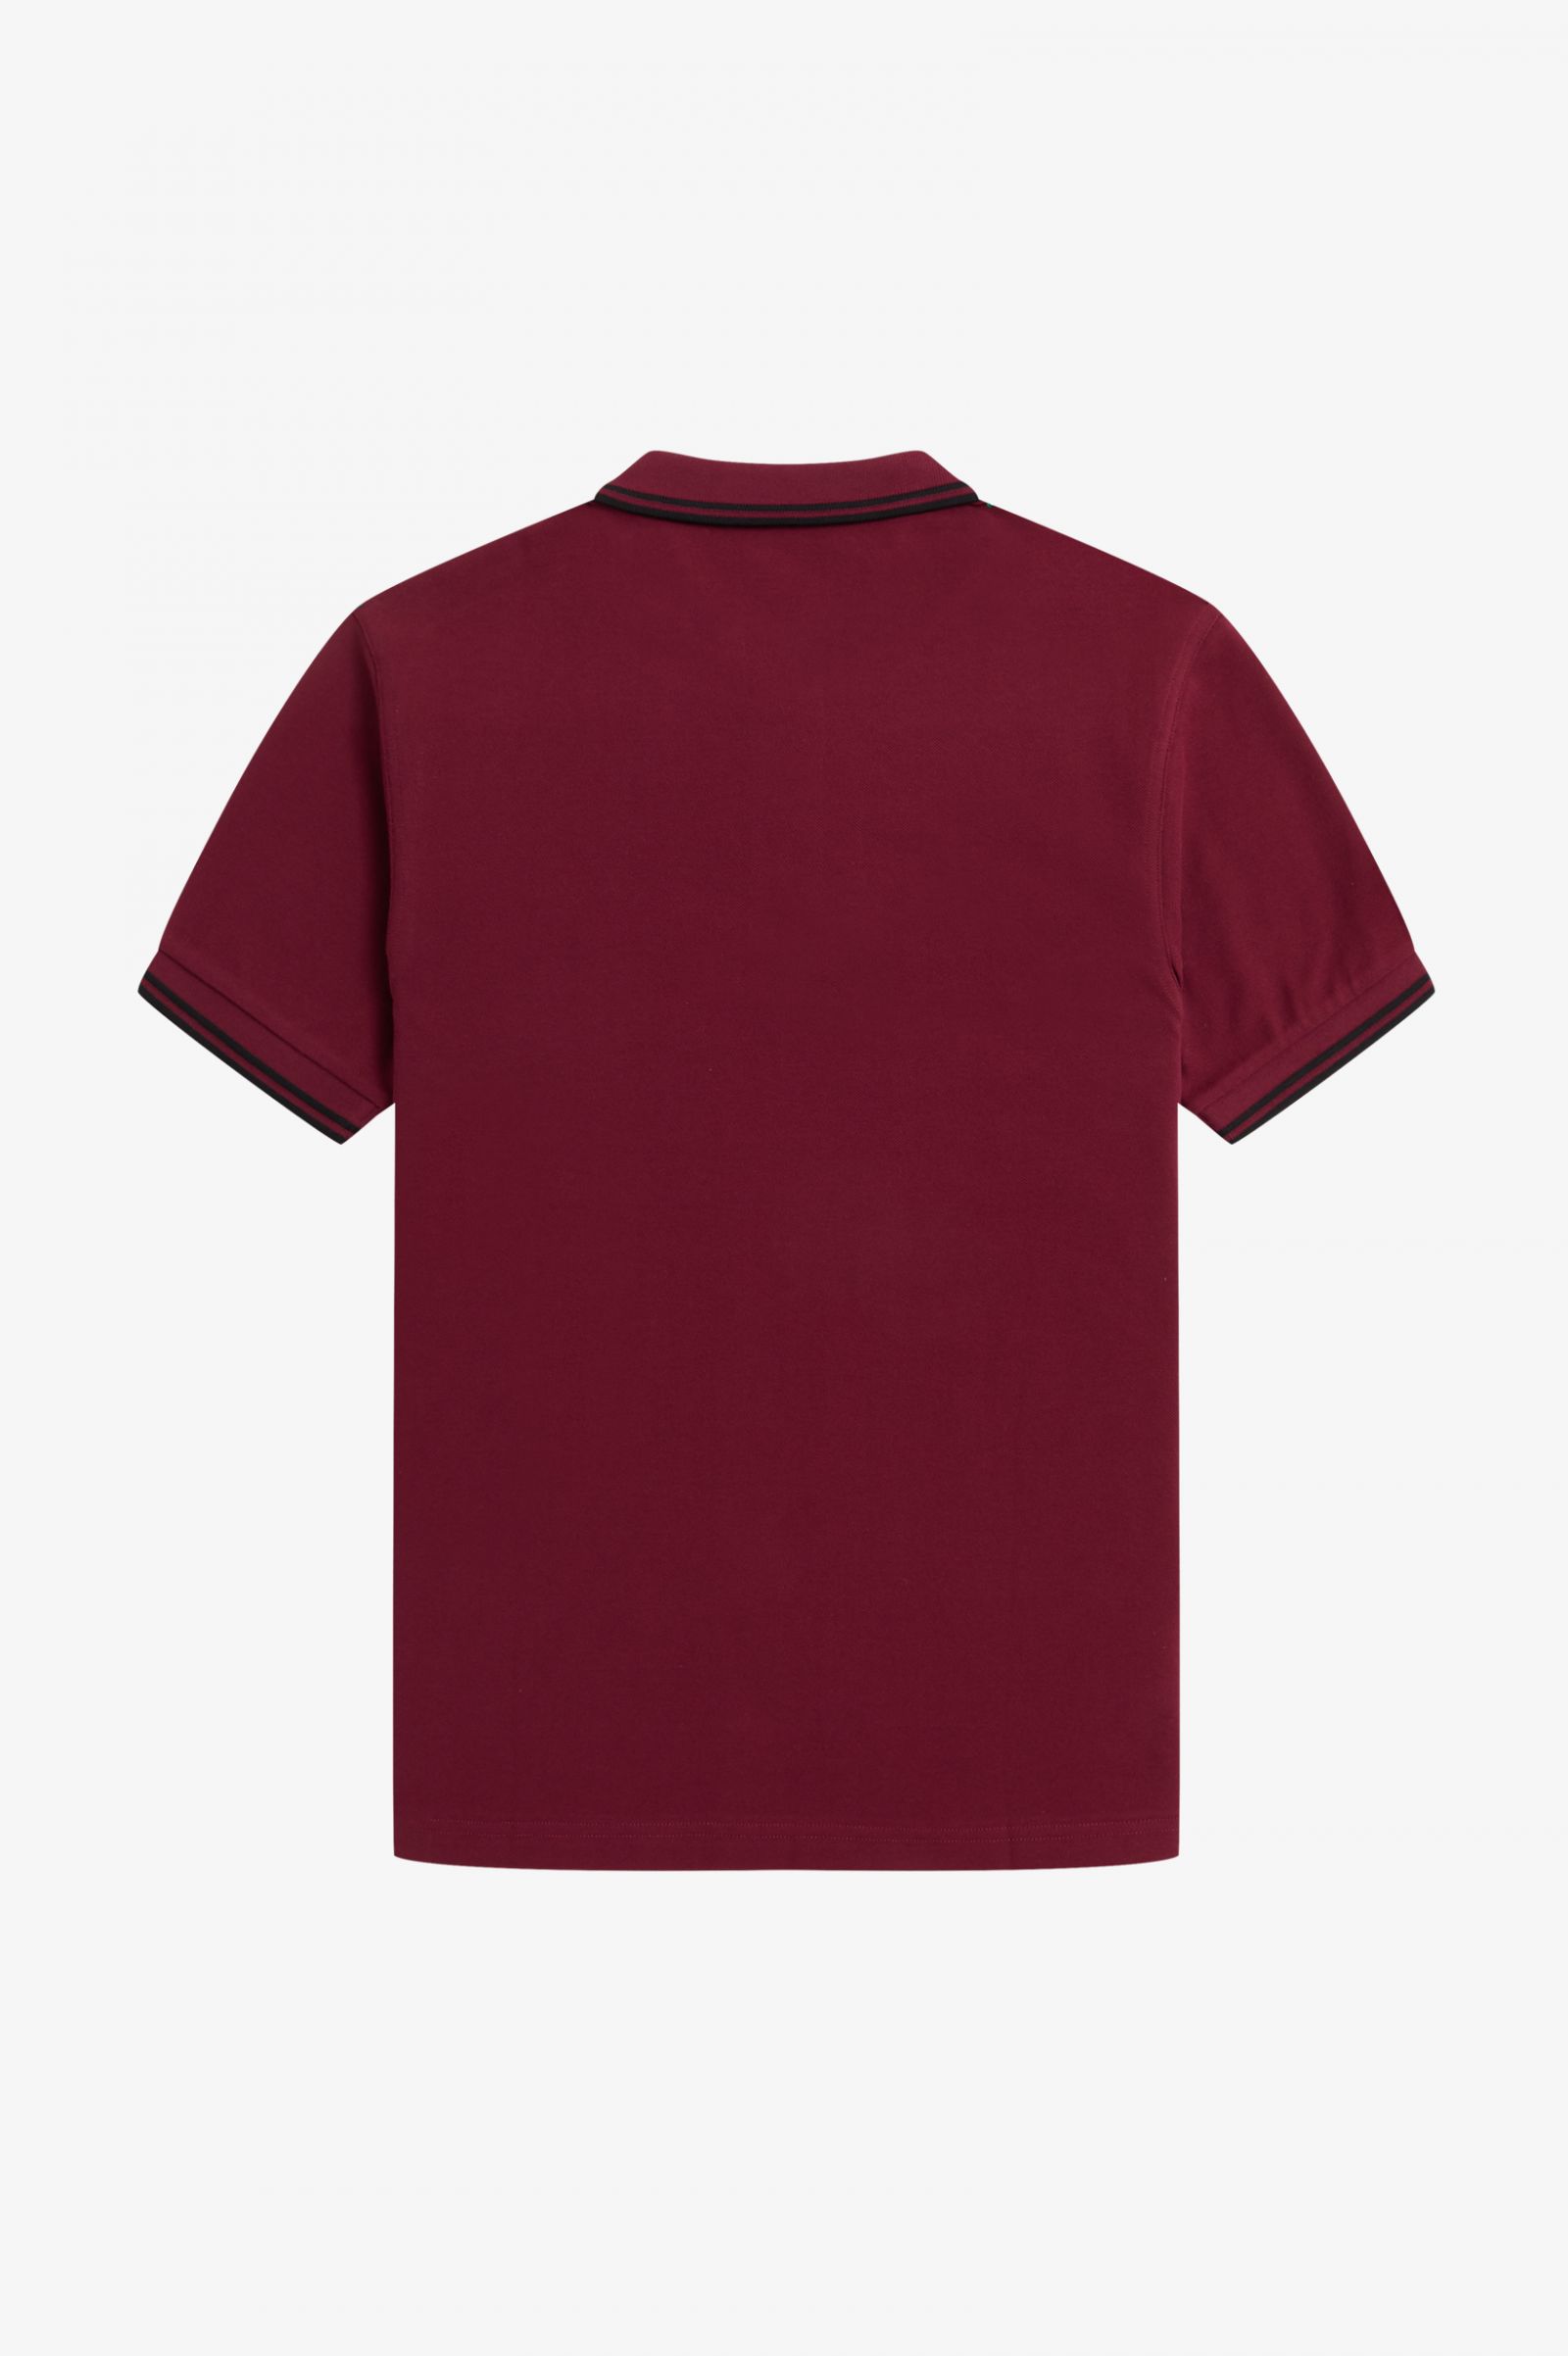 Fred Perry Twin Tipped Herren Polo Shirt in Tawny Port/Schwarz